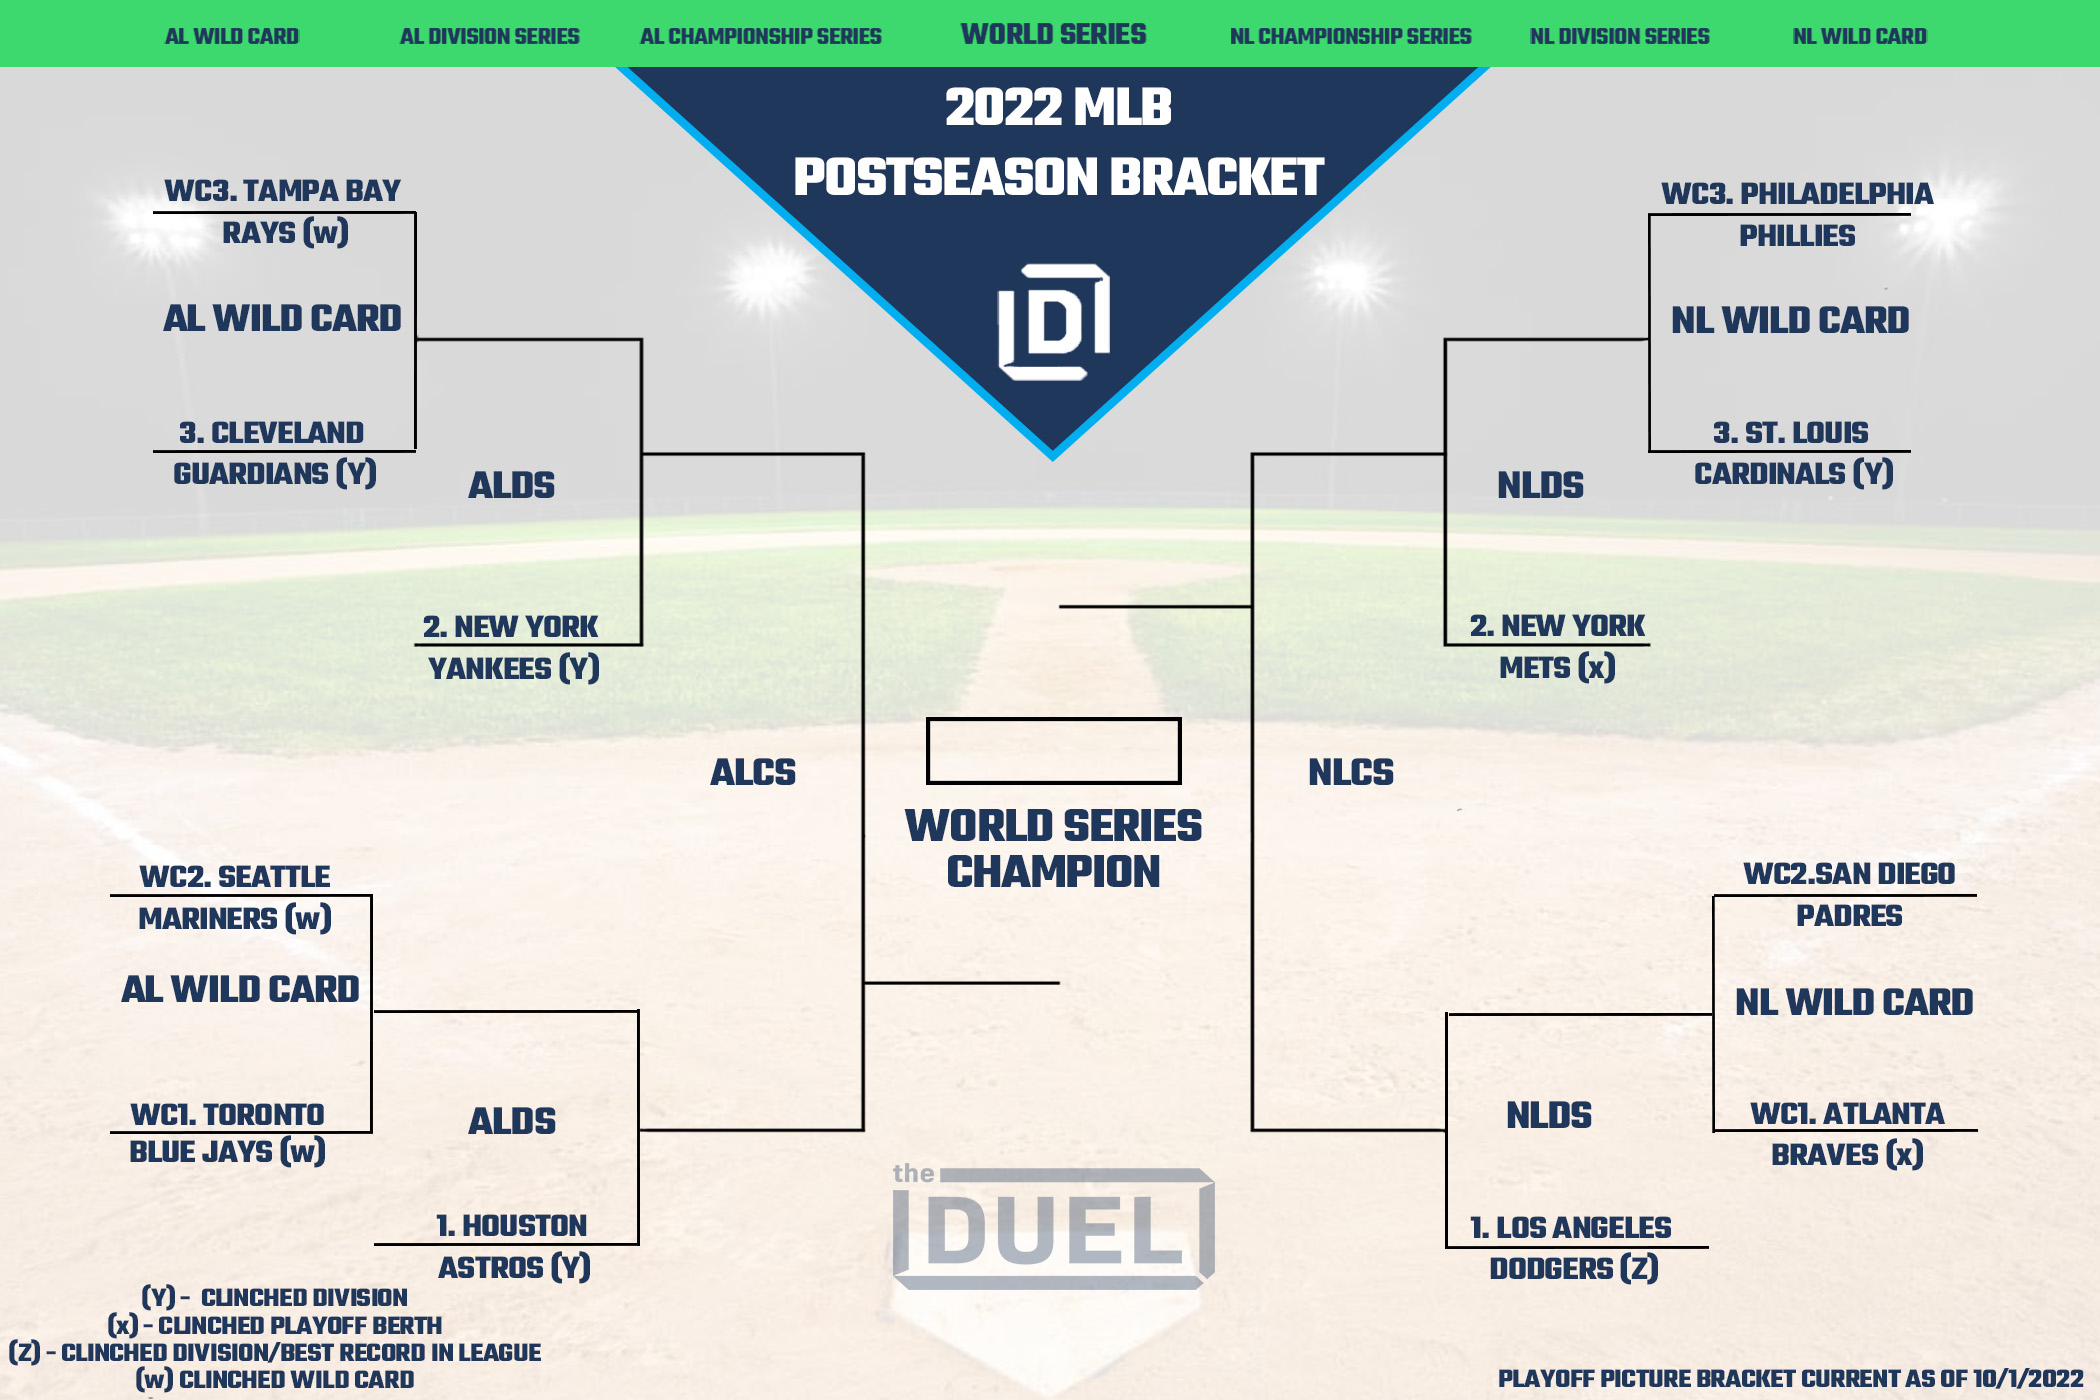 MLB Playoff Picture Bracket for the 2022 Postseason as of October 1